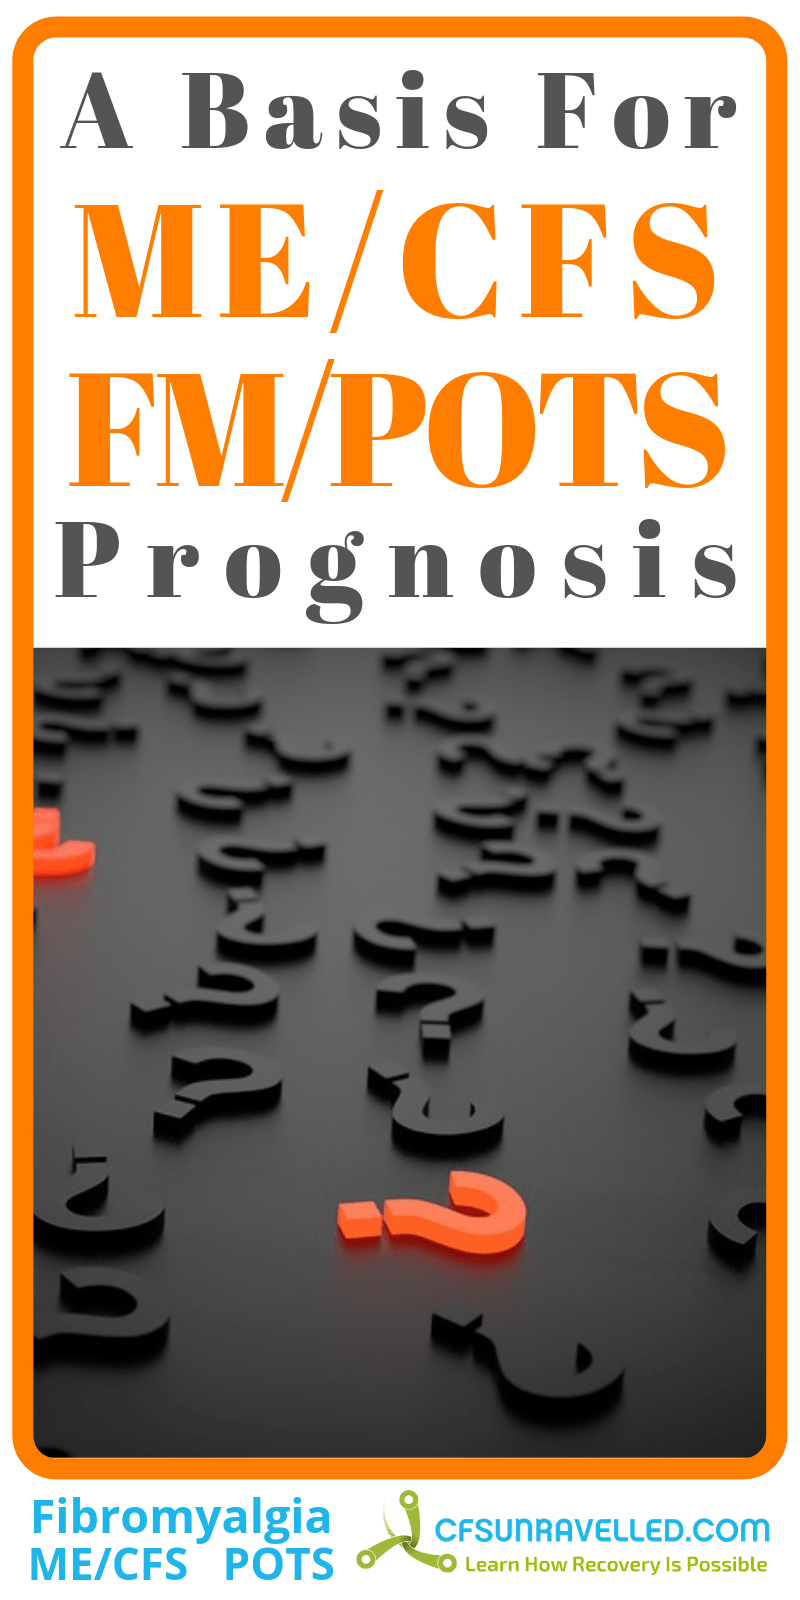 poster about prognosis with questionmarks